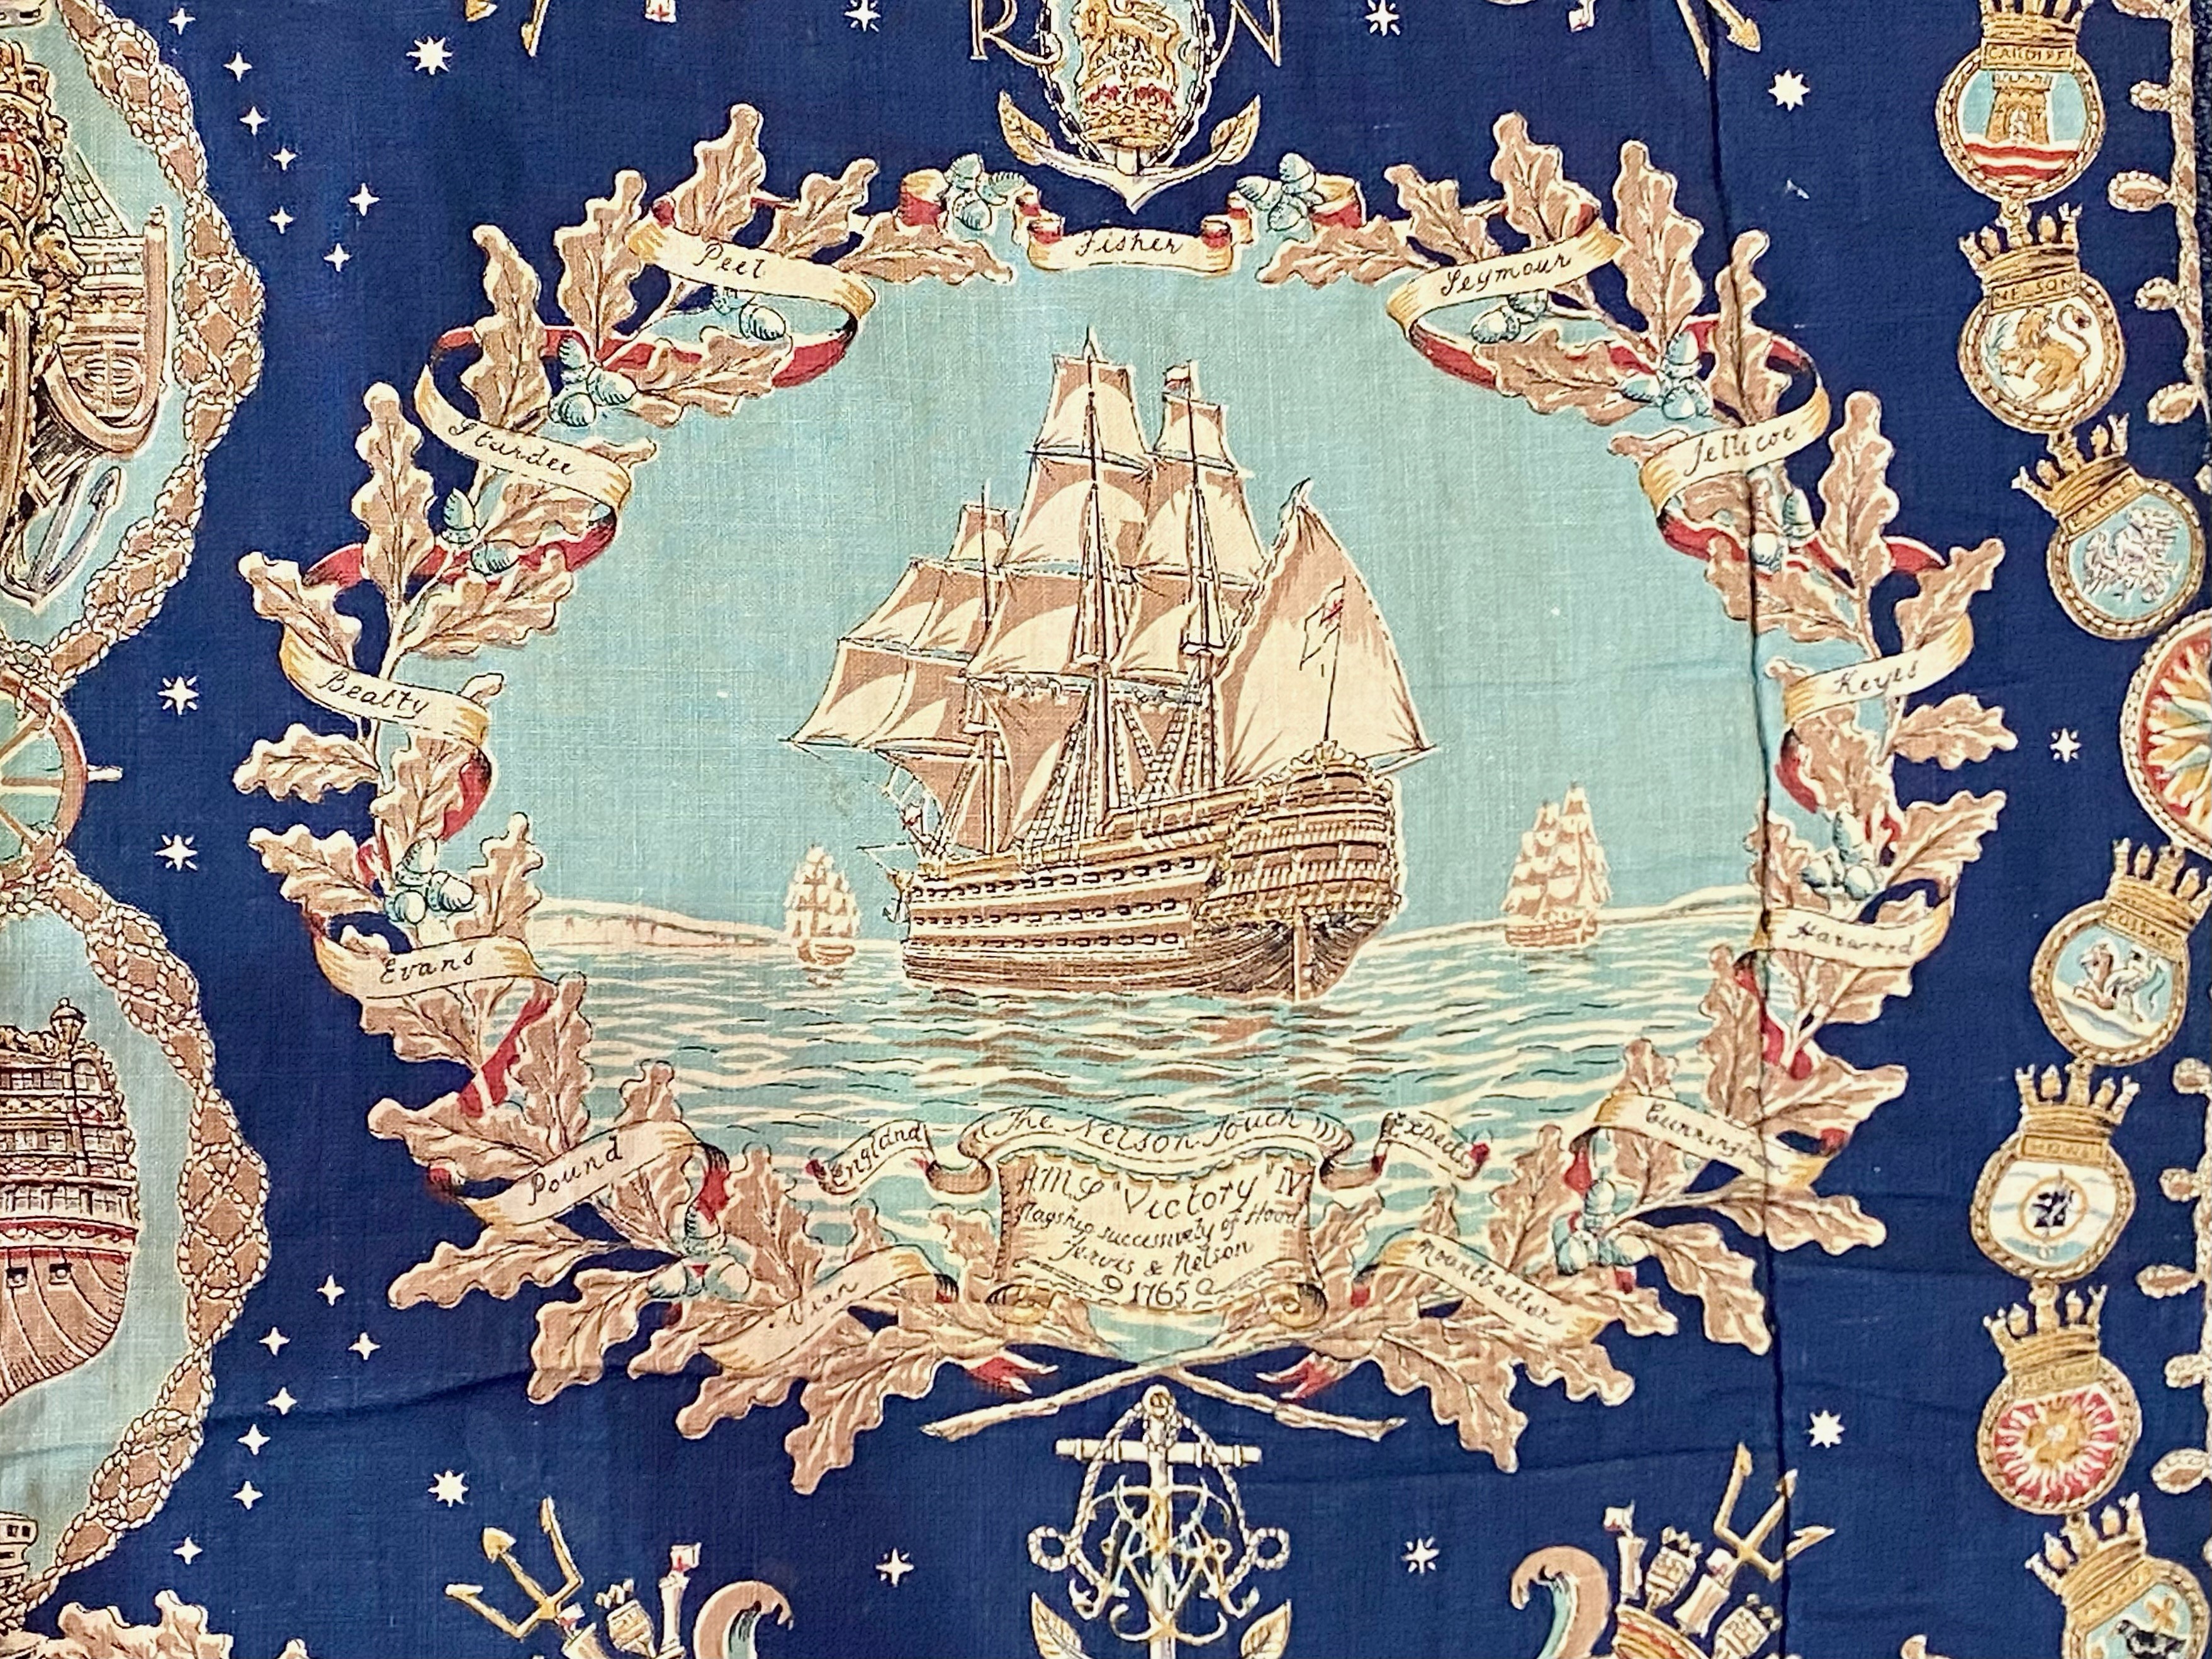 Cunard Liner Bed/Sofa Throw, blue patterned fabric representing British Naval History from 1515. - Image 3 of 3